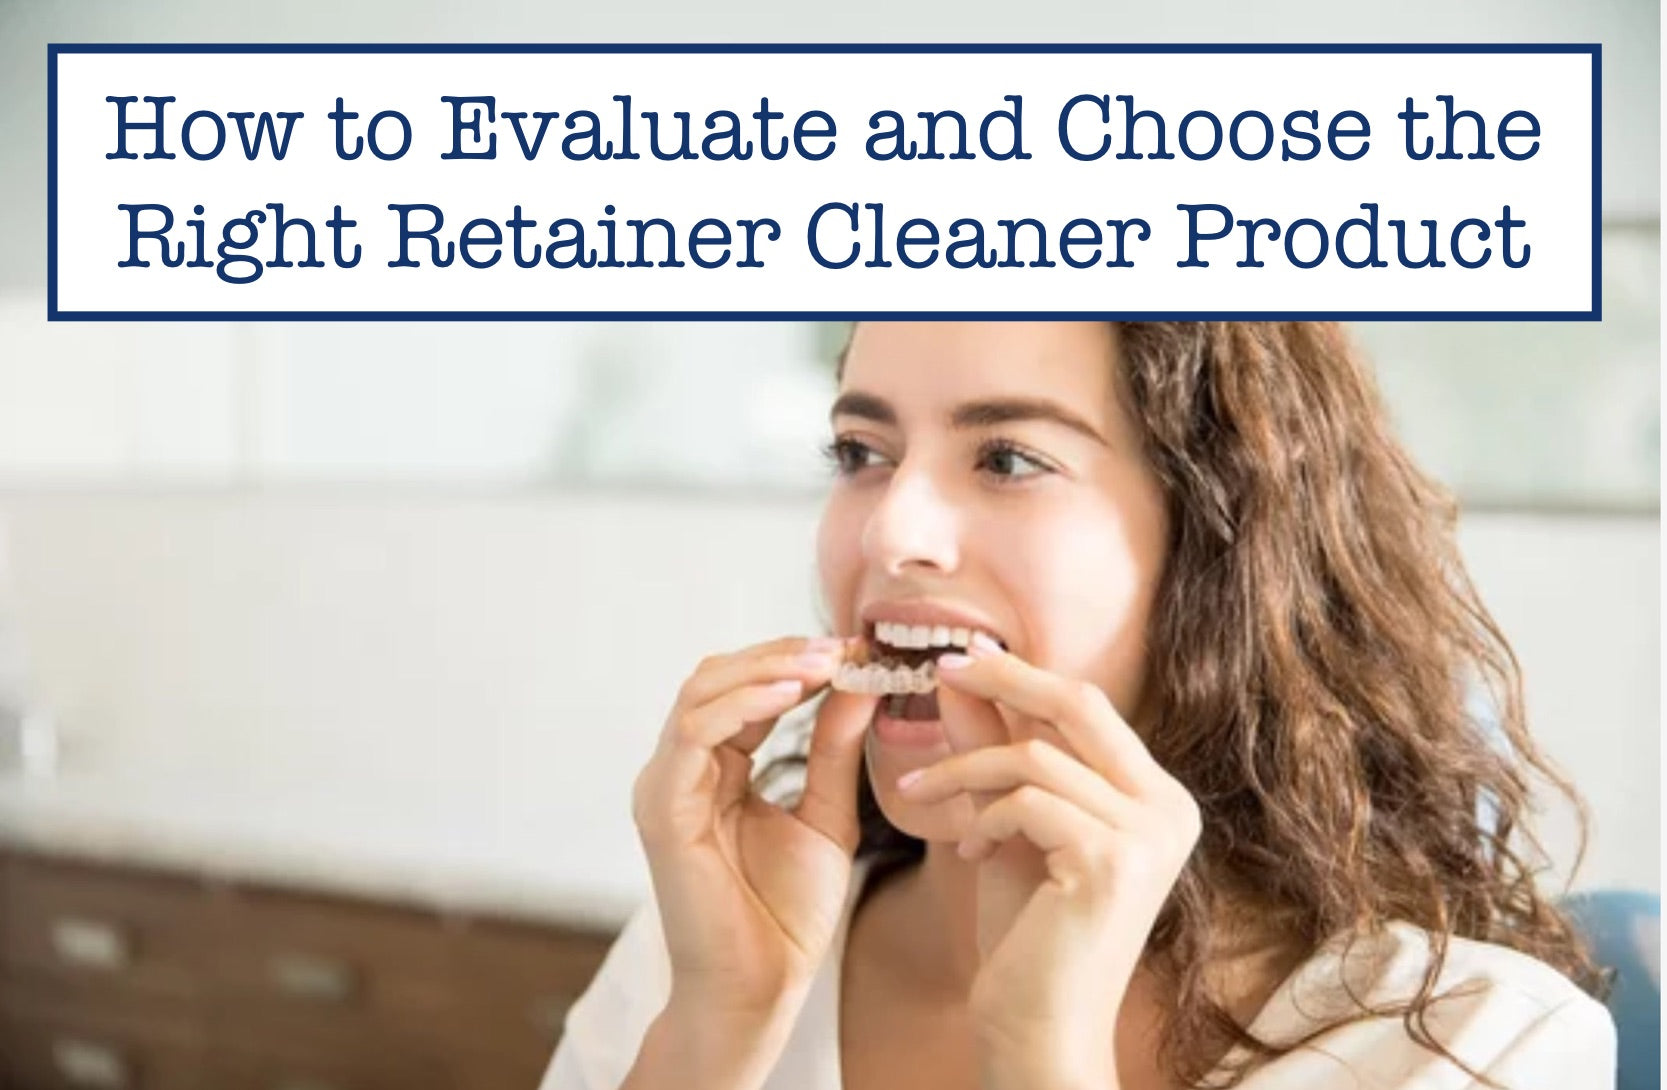 How to Evaluate and Choose the Right Retainer Cleaner Product